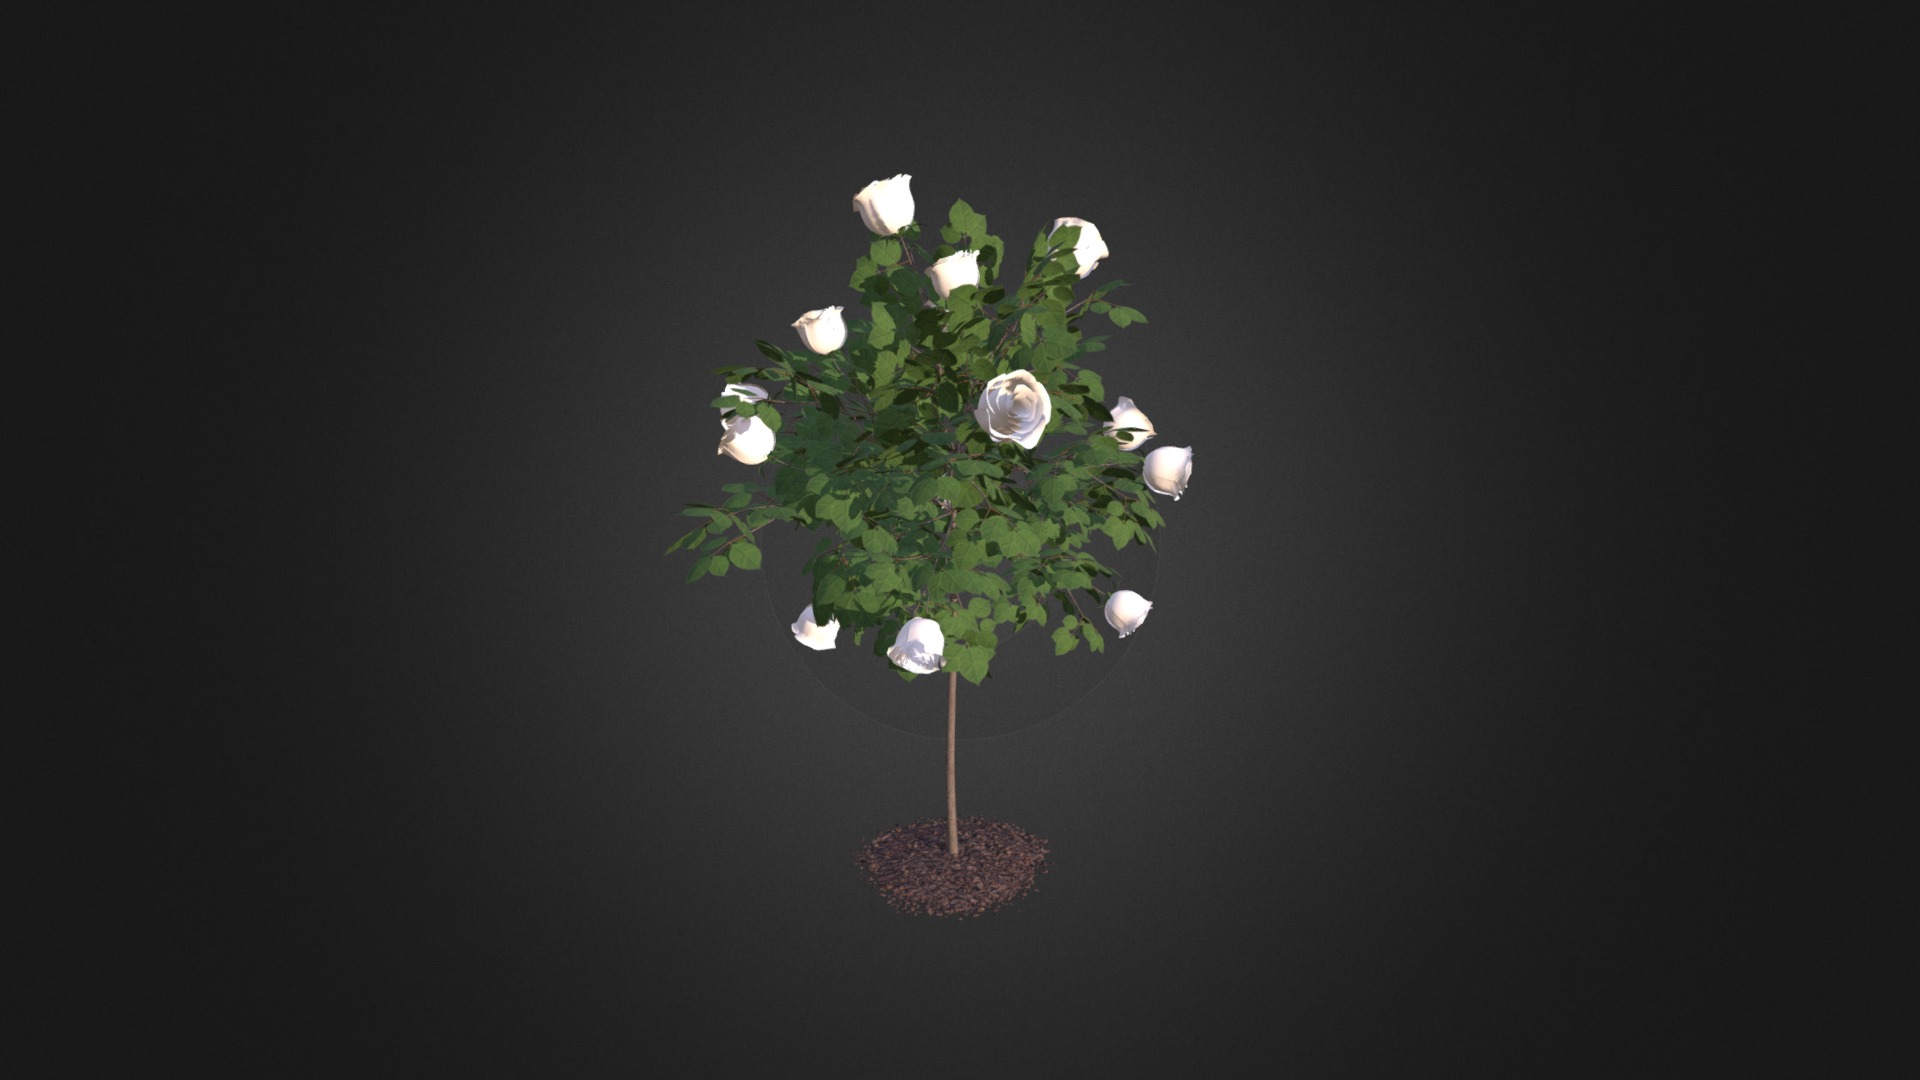 3d model of small white rose tree. Height: 163cm. Compatible with 3ds max 2010 or higher and many others 3d model